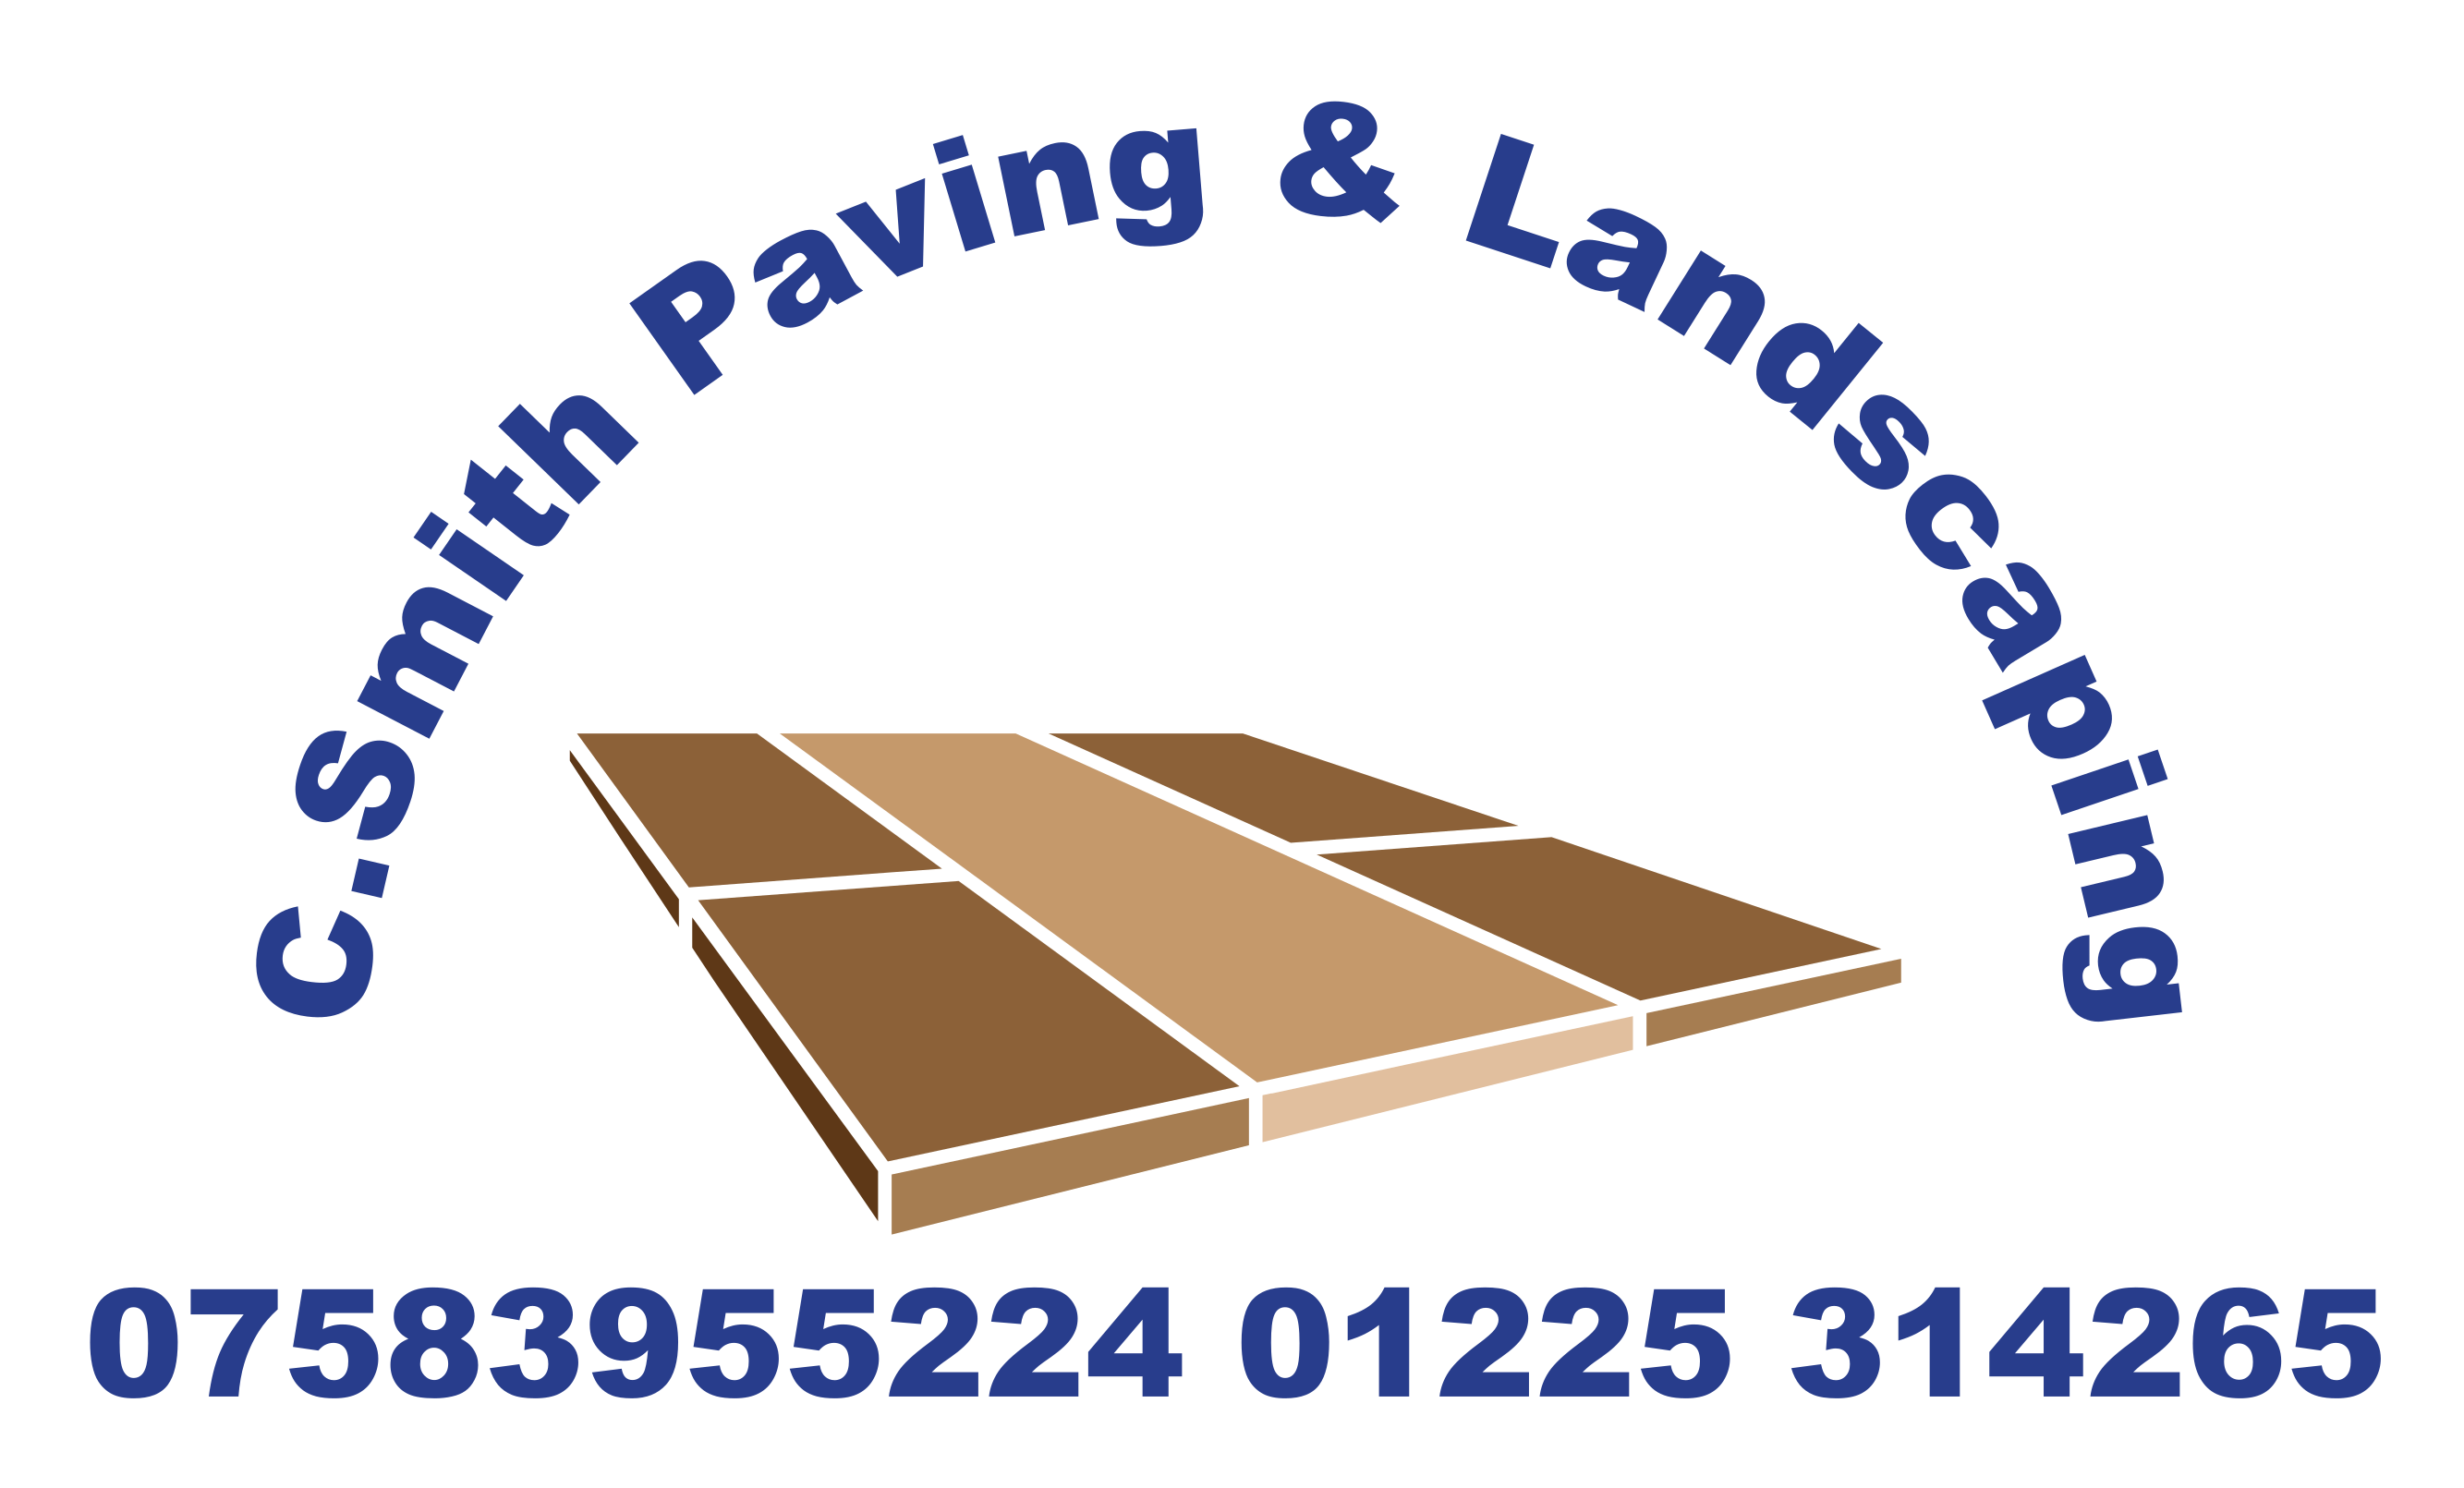 C.Smith Paving And Landscaping